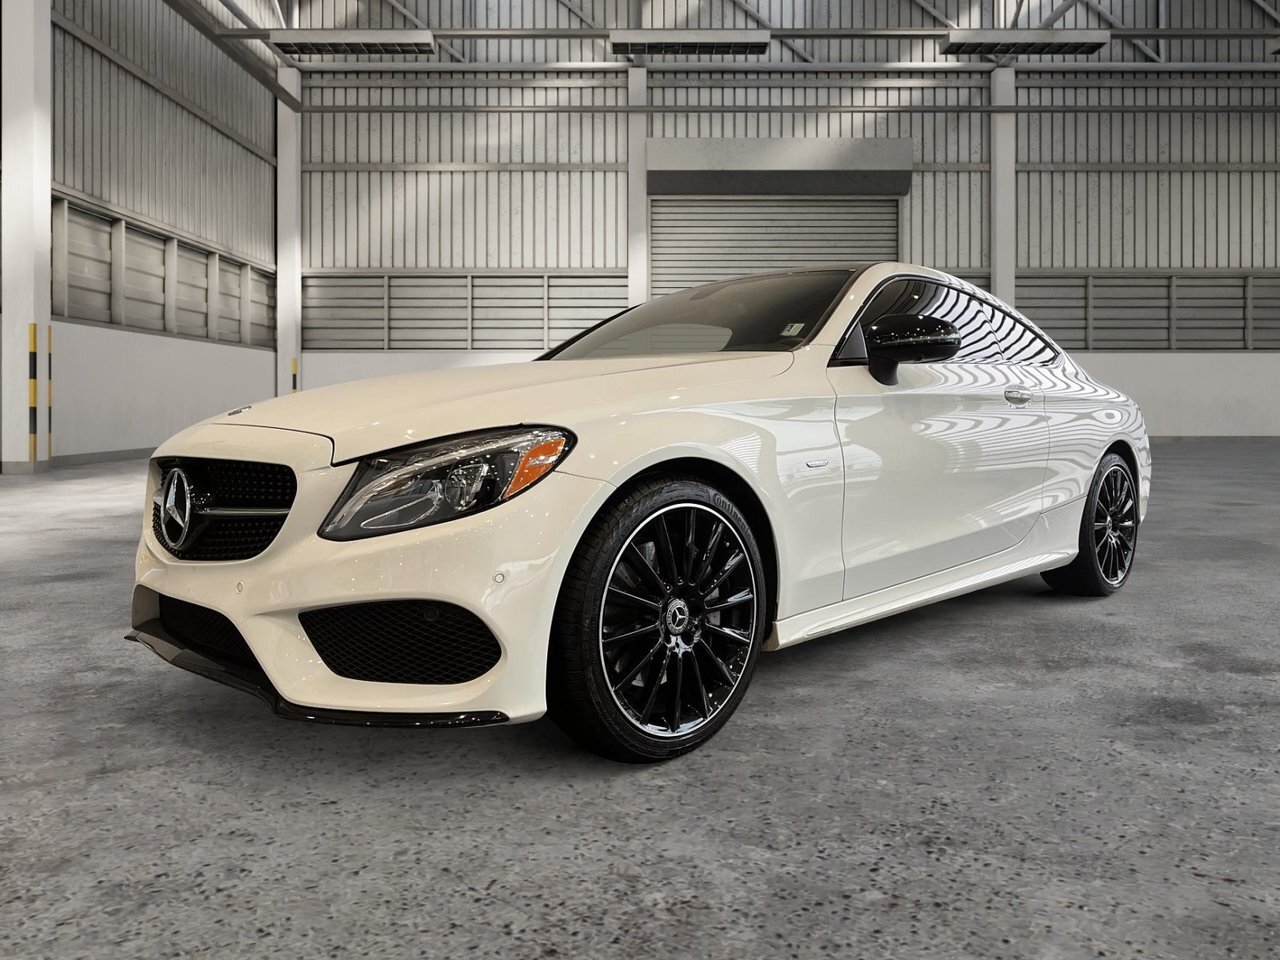 2018 Mercedes-Benz C300 4MATIC Coupe Extended warranty! Immaculate!